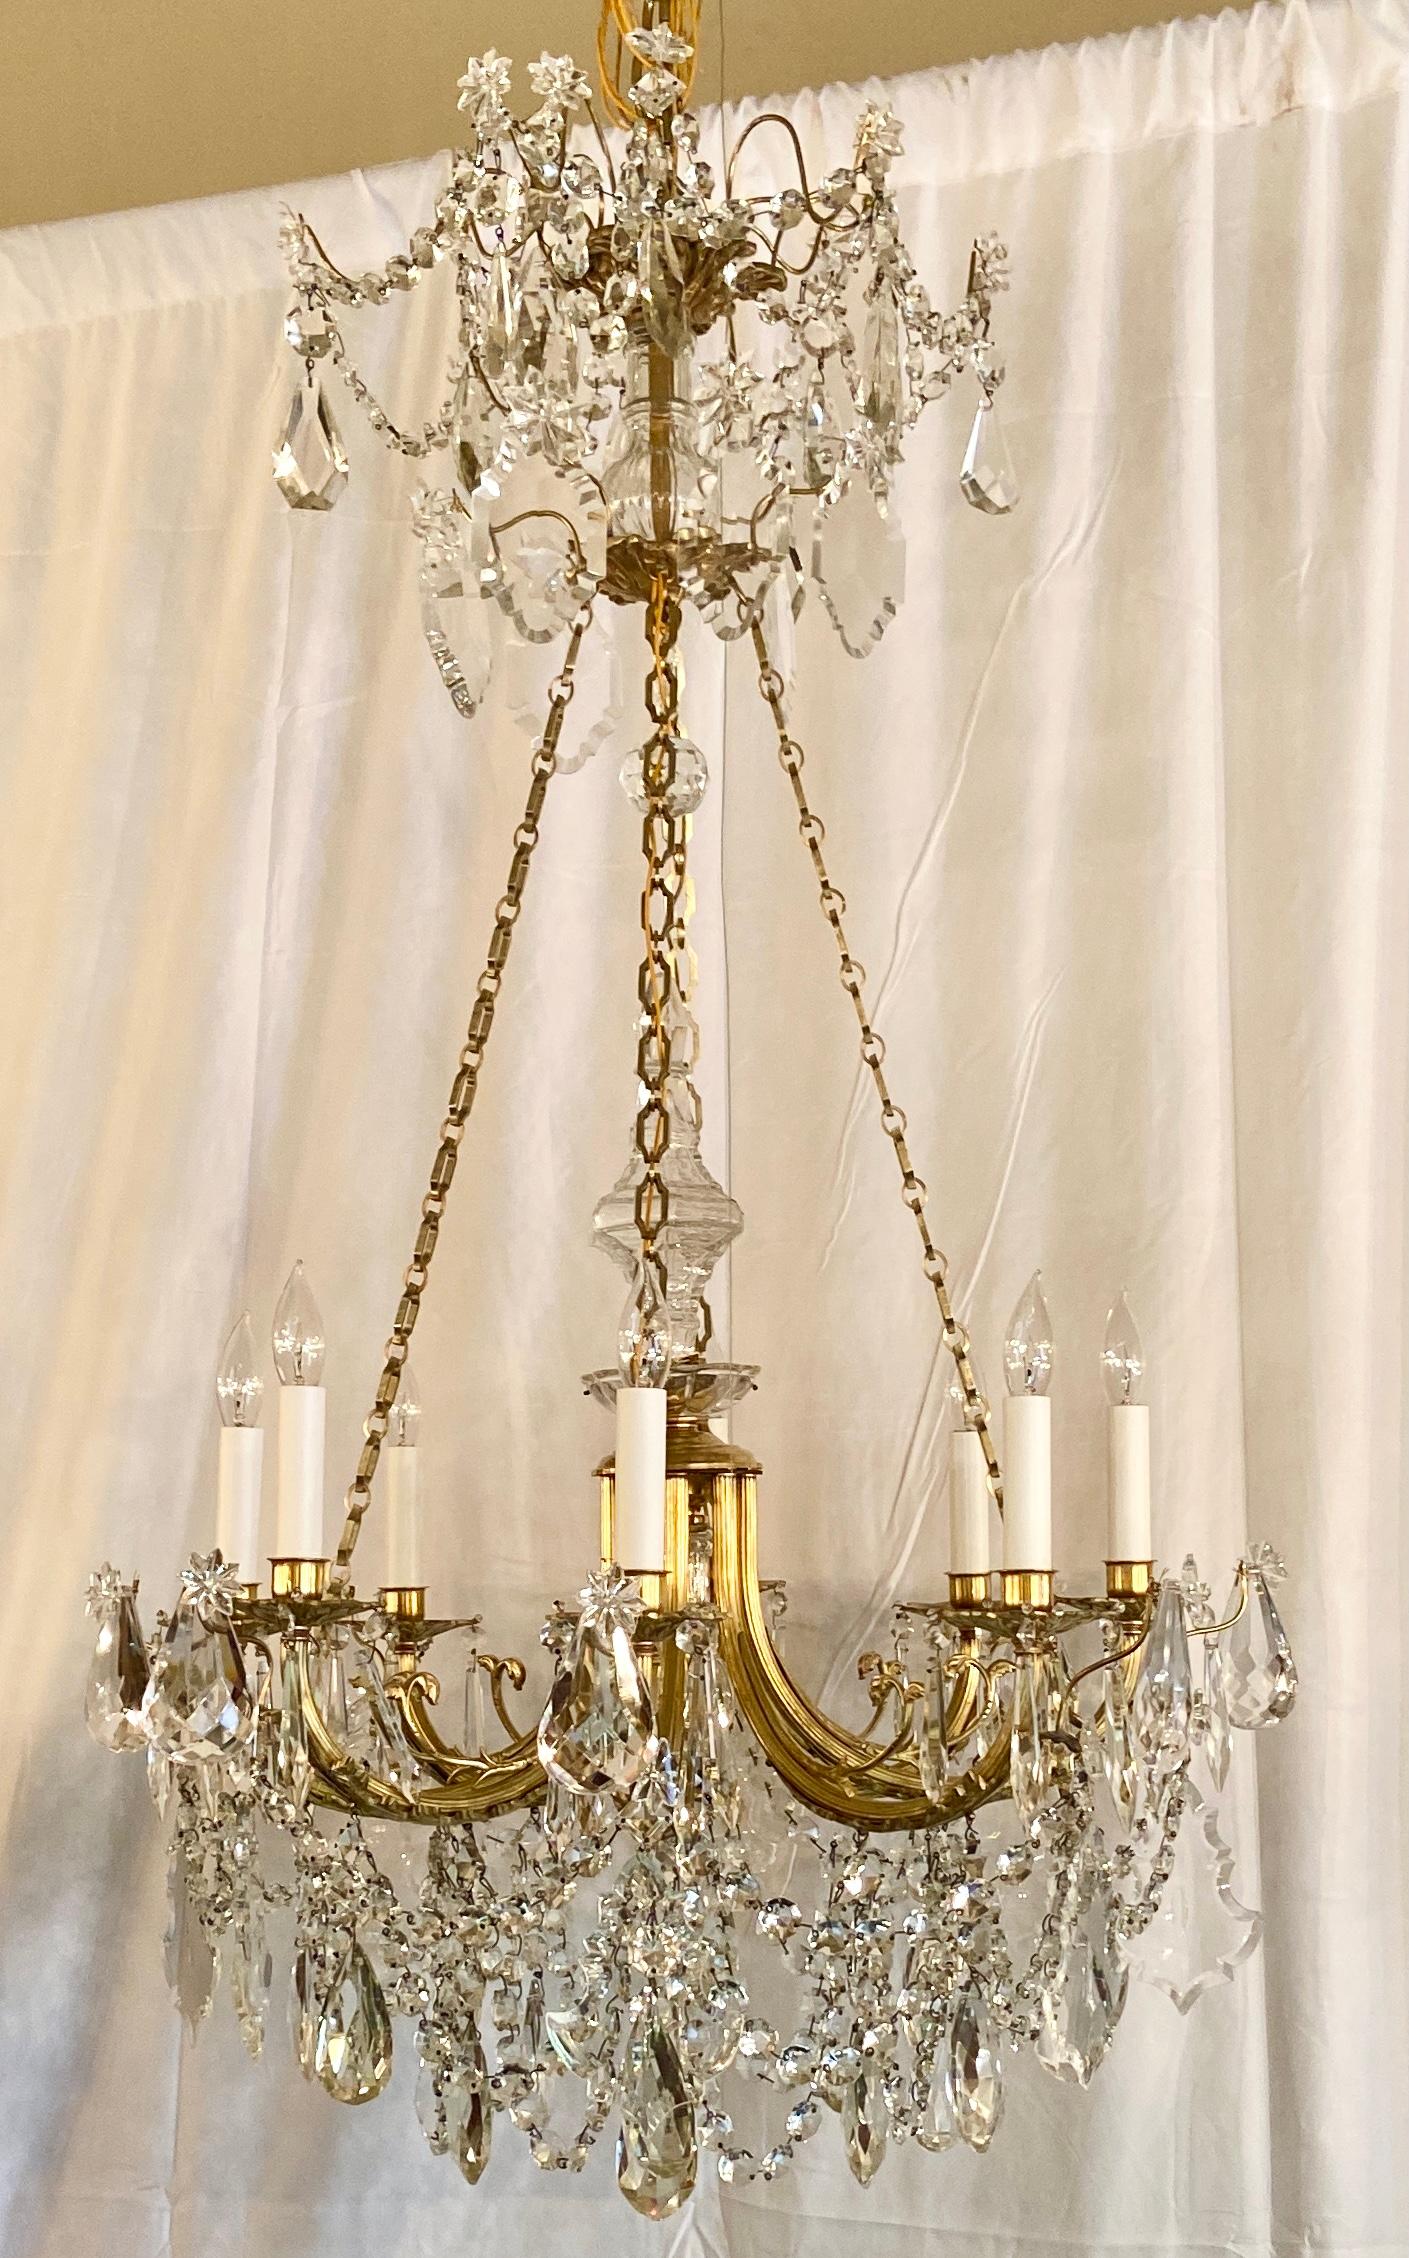 Antique French gold bronze and crystal chandelier, Circa 1890s.